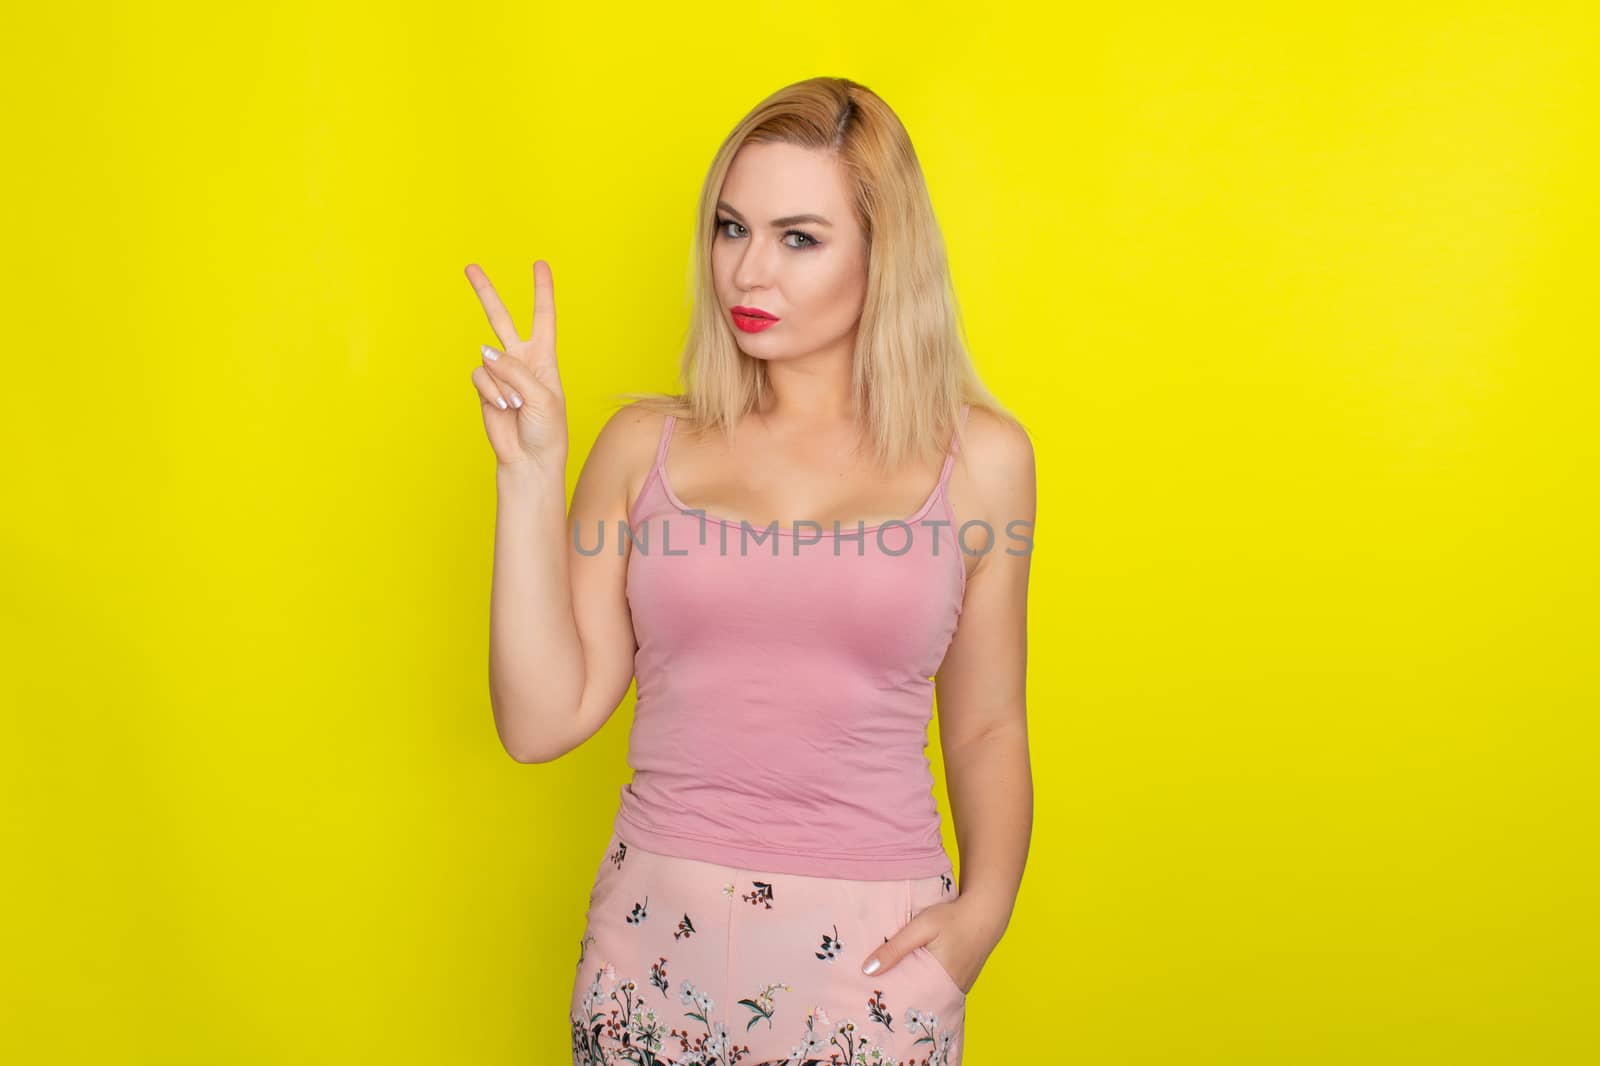 Indoor summer closeup portrait of young stylish fashion glamorous blonde woman posing in pink shorts and shirt, standing over yellow background